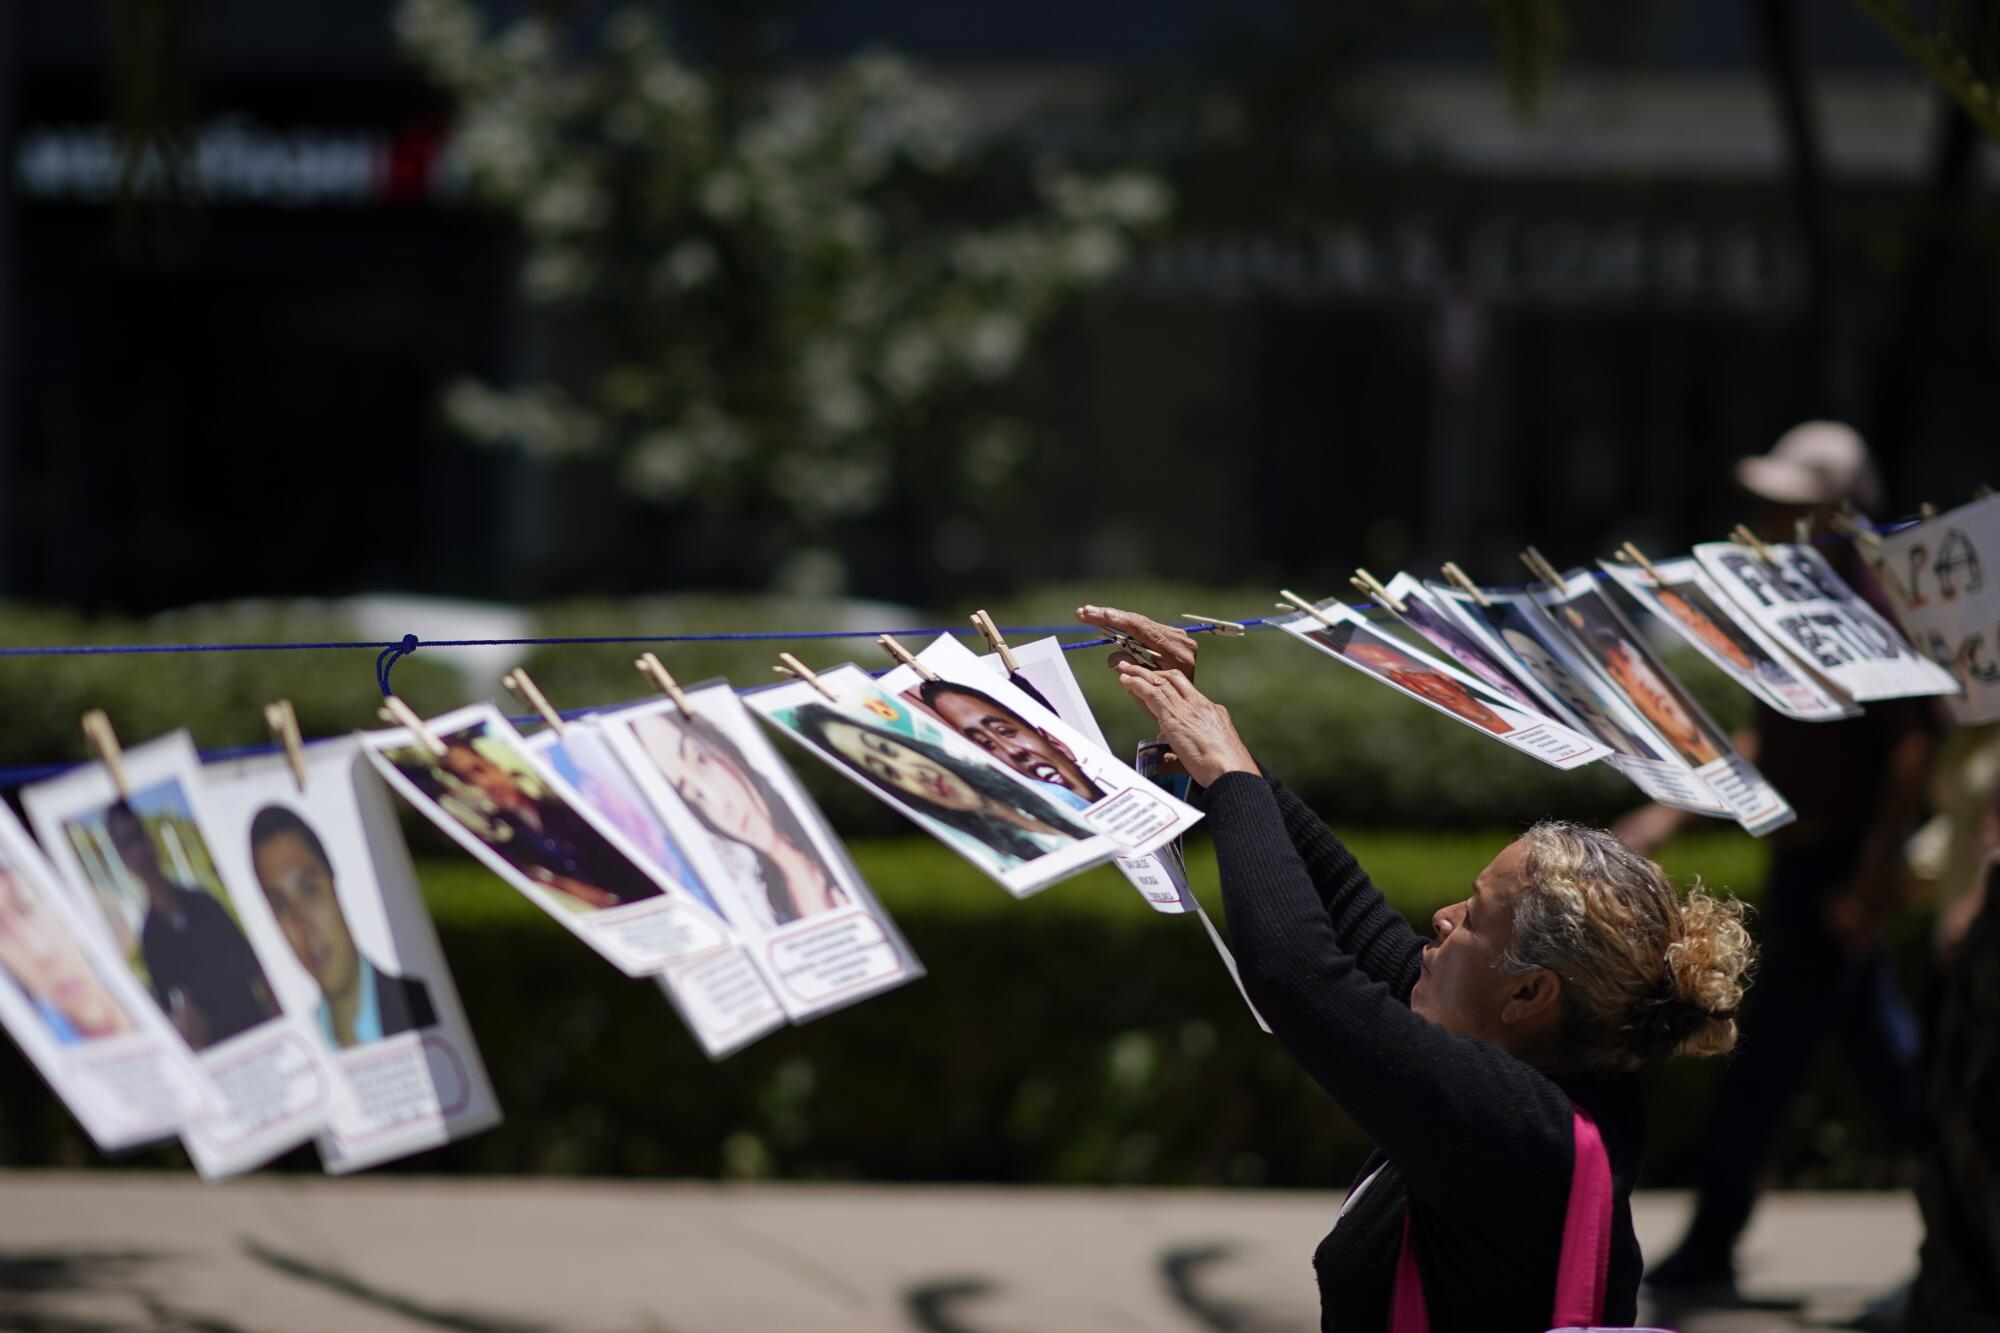 A woman hangs the portrait of a missing person alongside others in a makeshift line along a road.